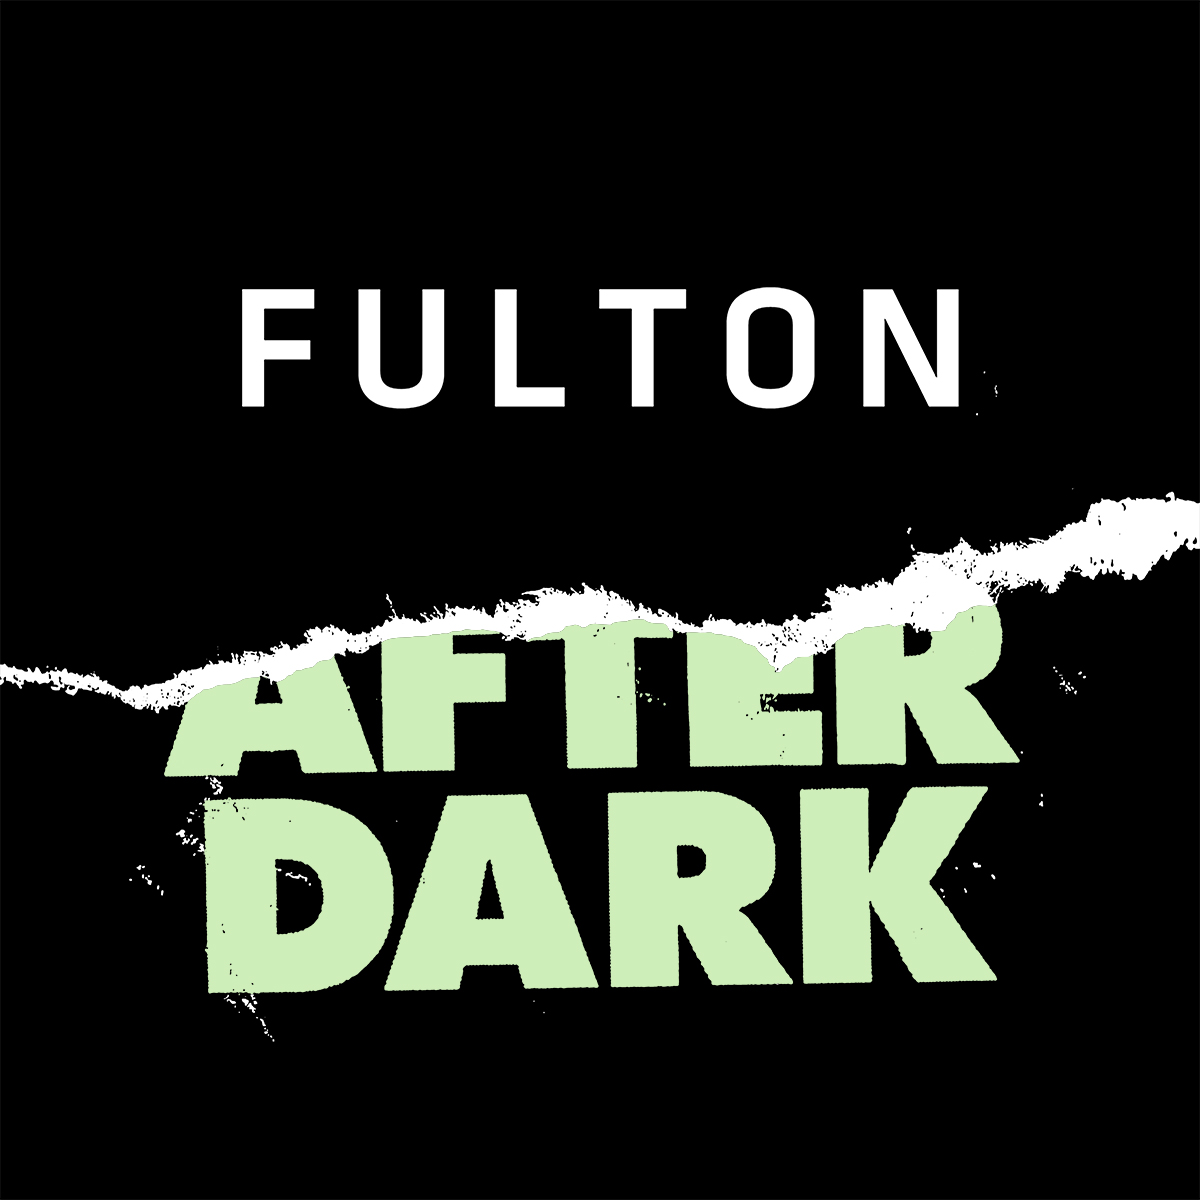 What is Fulton After Dark?